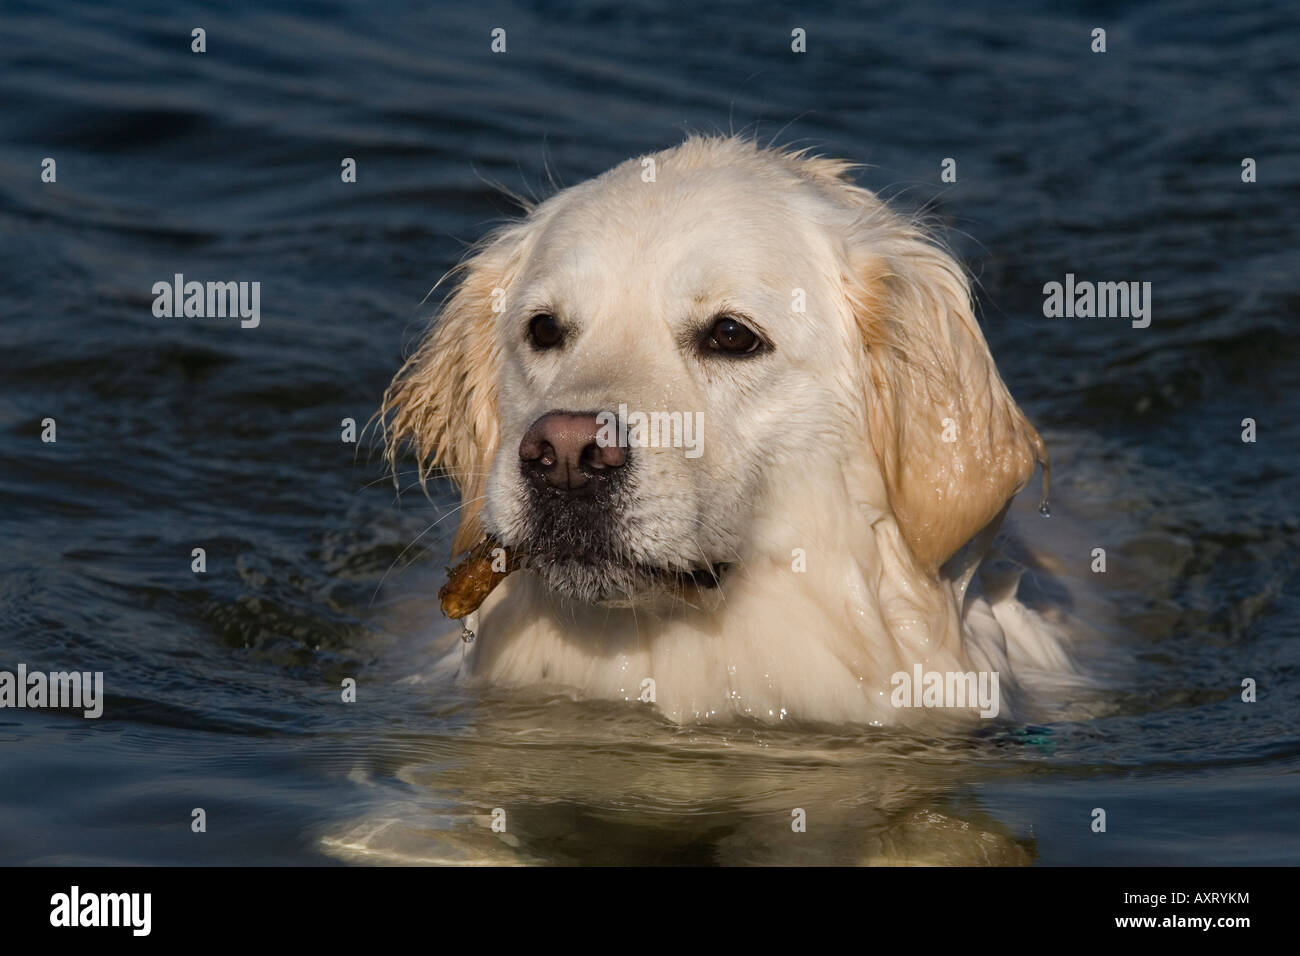 Golden Retriever swimming and carrying stick Stock Photo